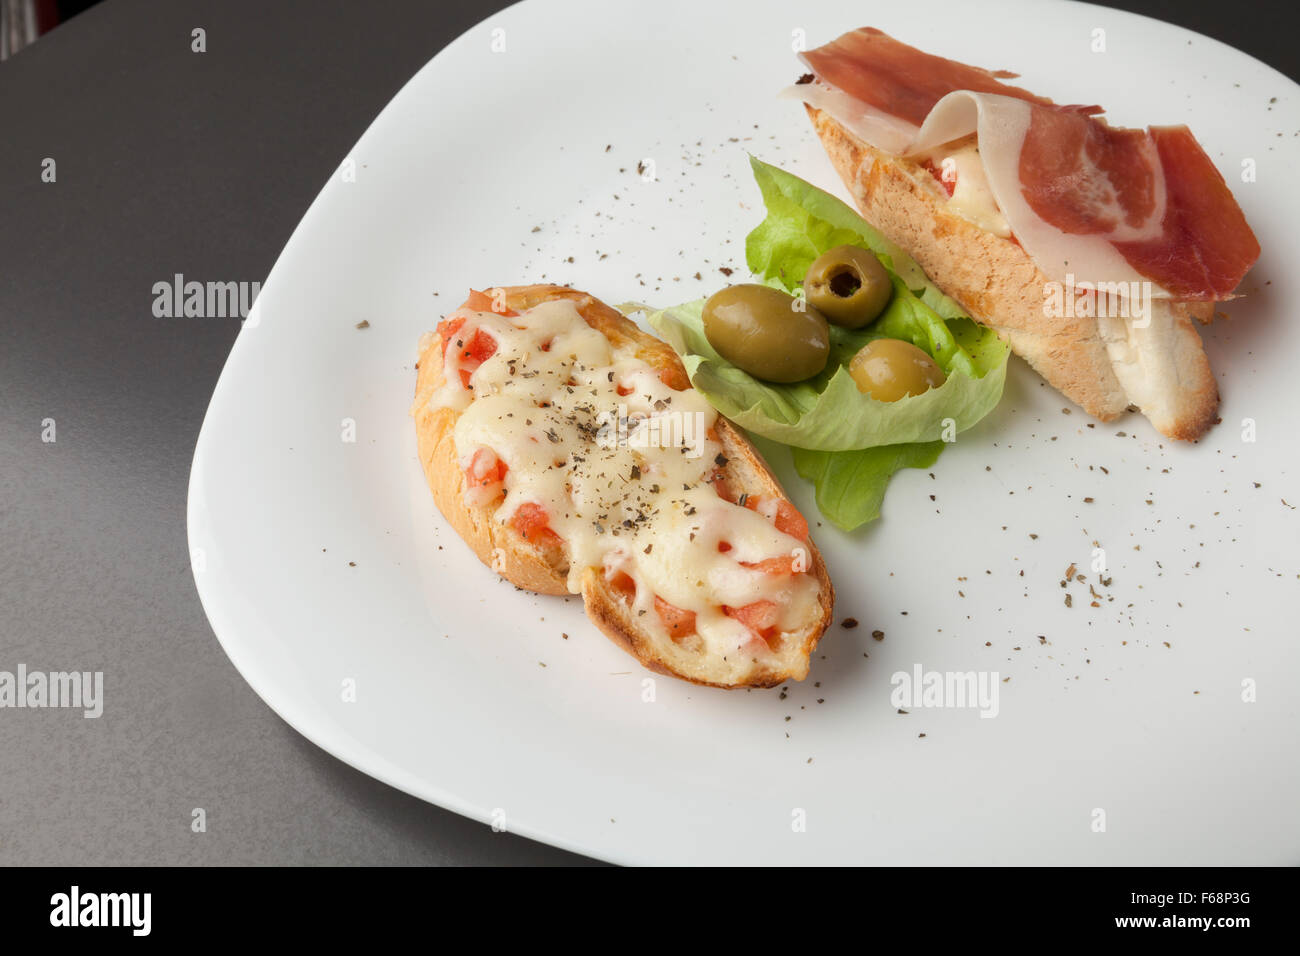 sandwiches, baked with prosciutto and cheese on white plate Stock Photo